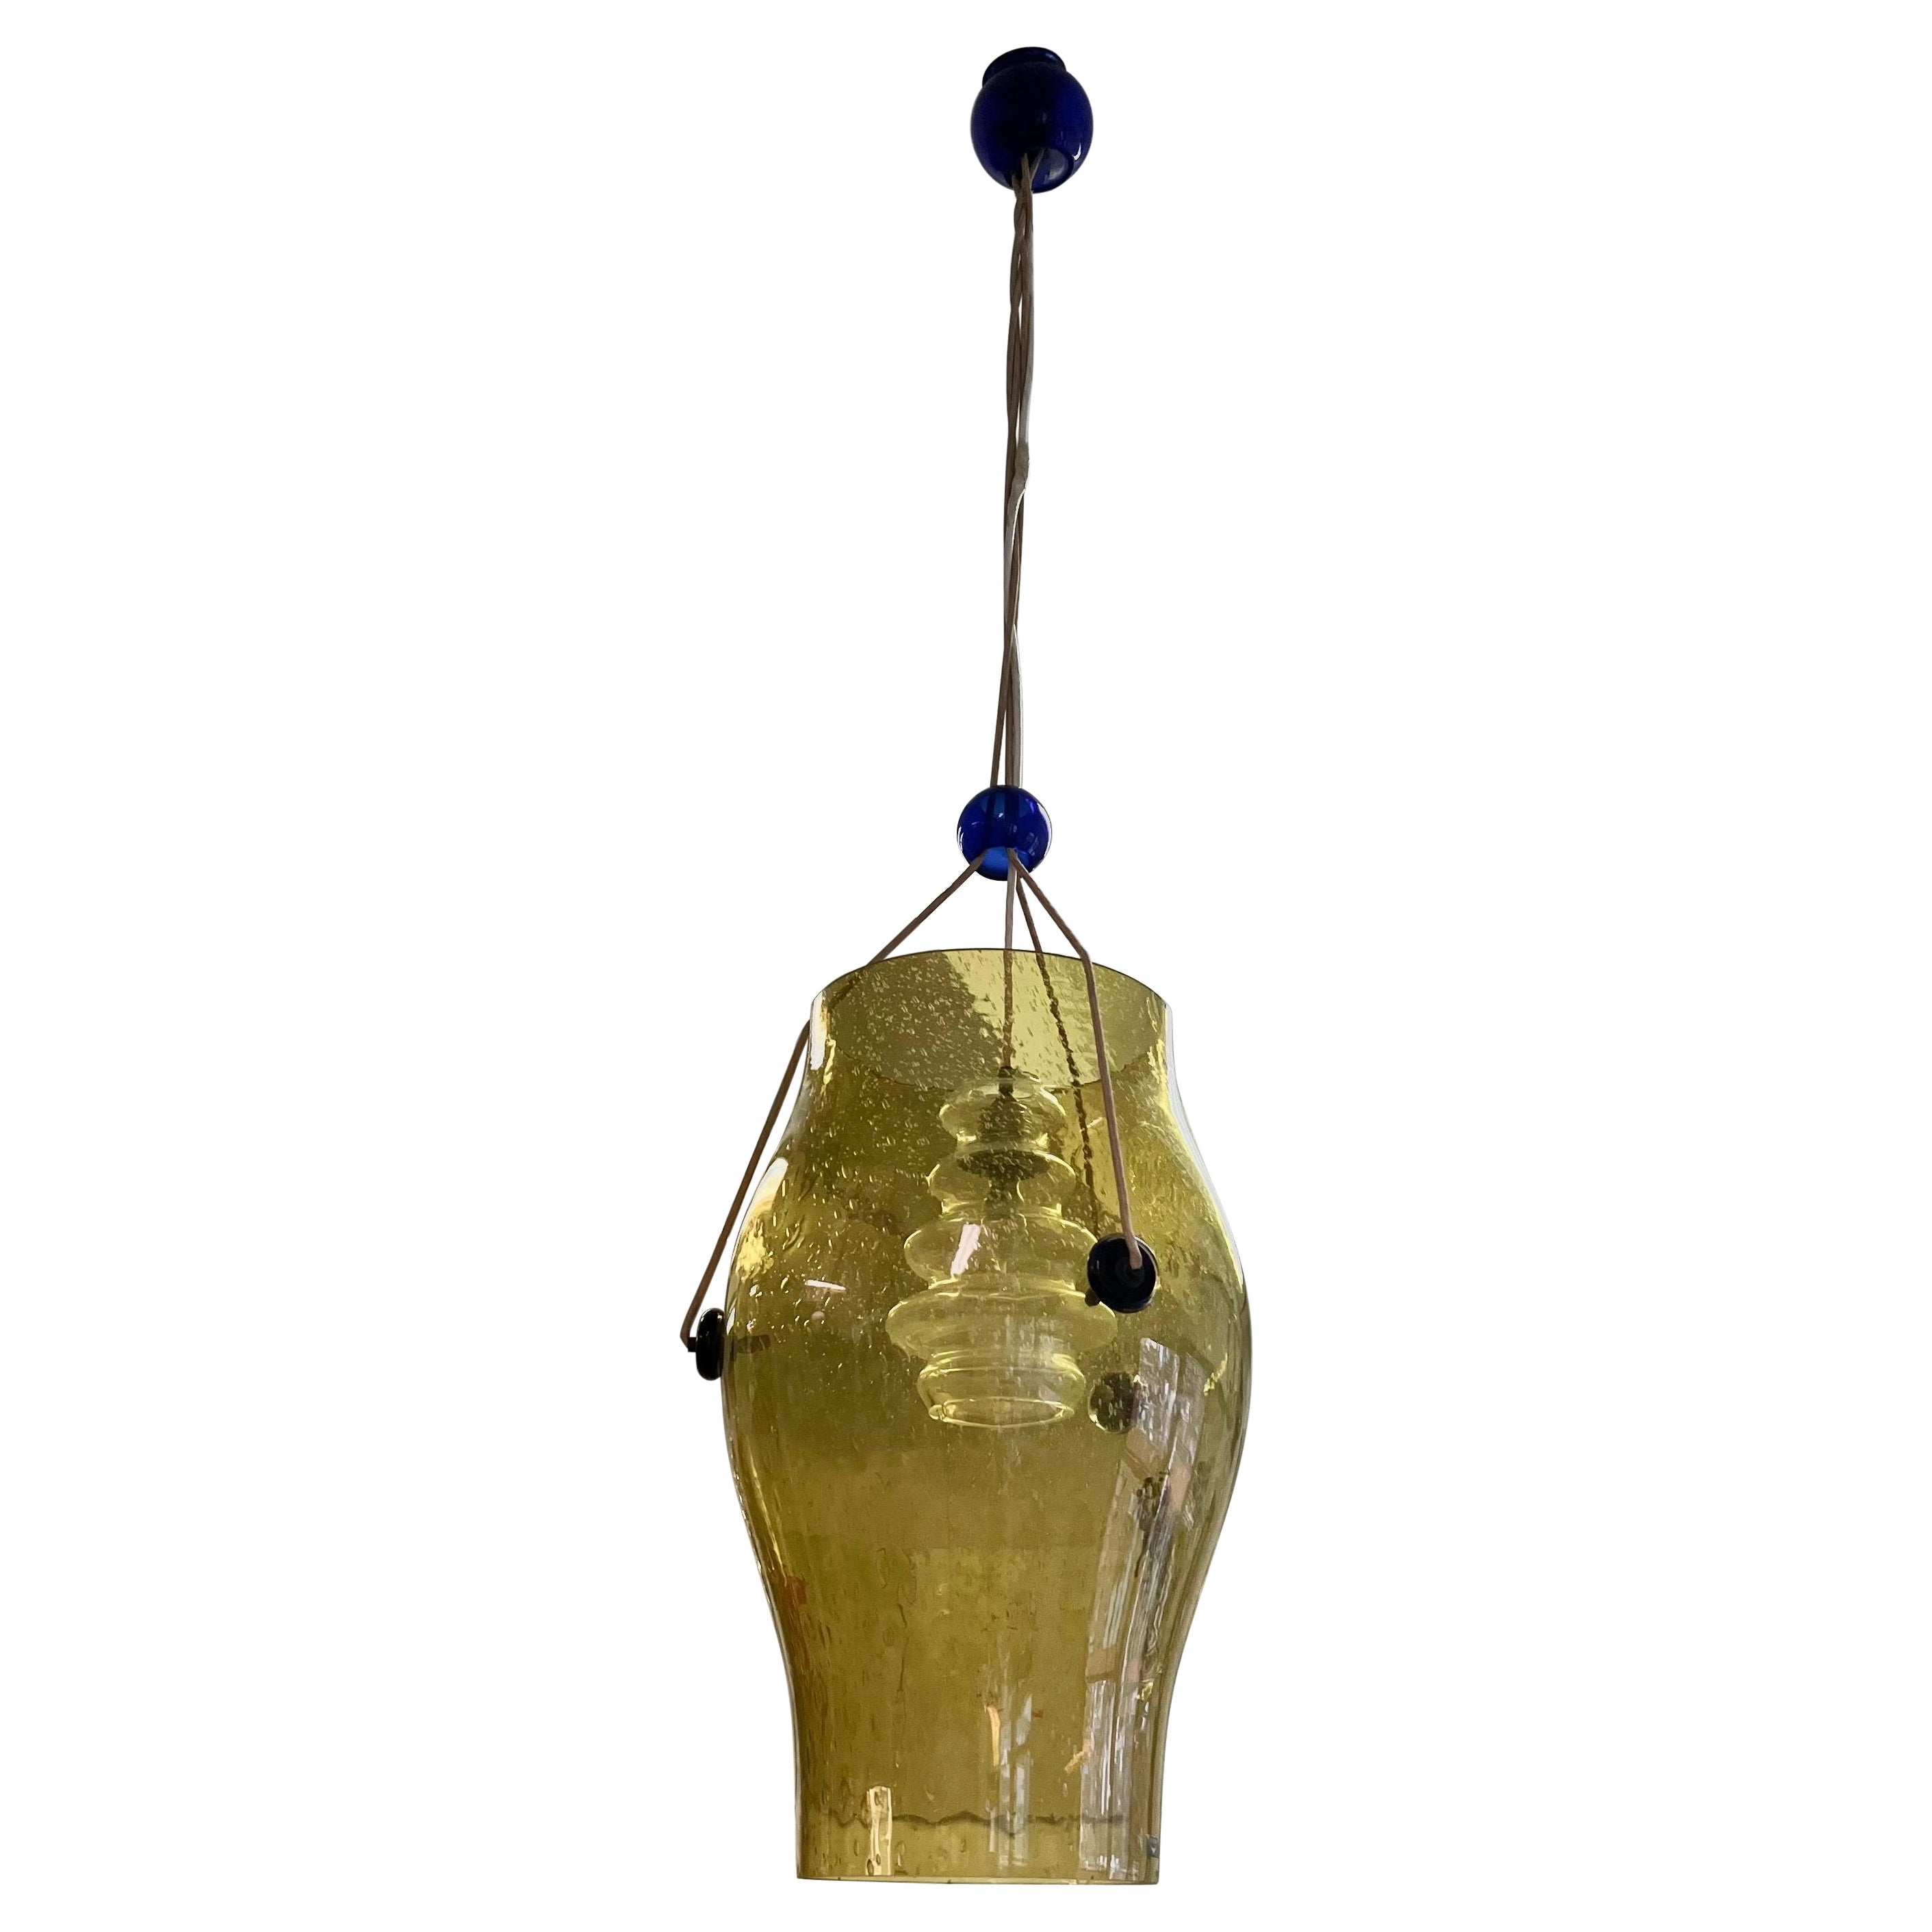 Italian Gold and Cobalt Blue Venetian / Murano Glass Chandelier by Vistosi, 1970 For Sale